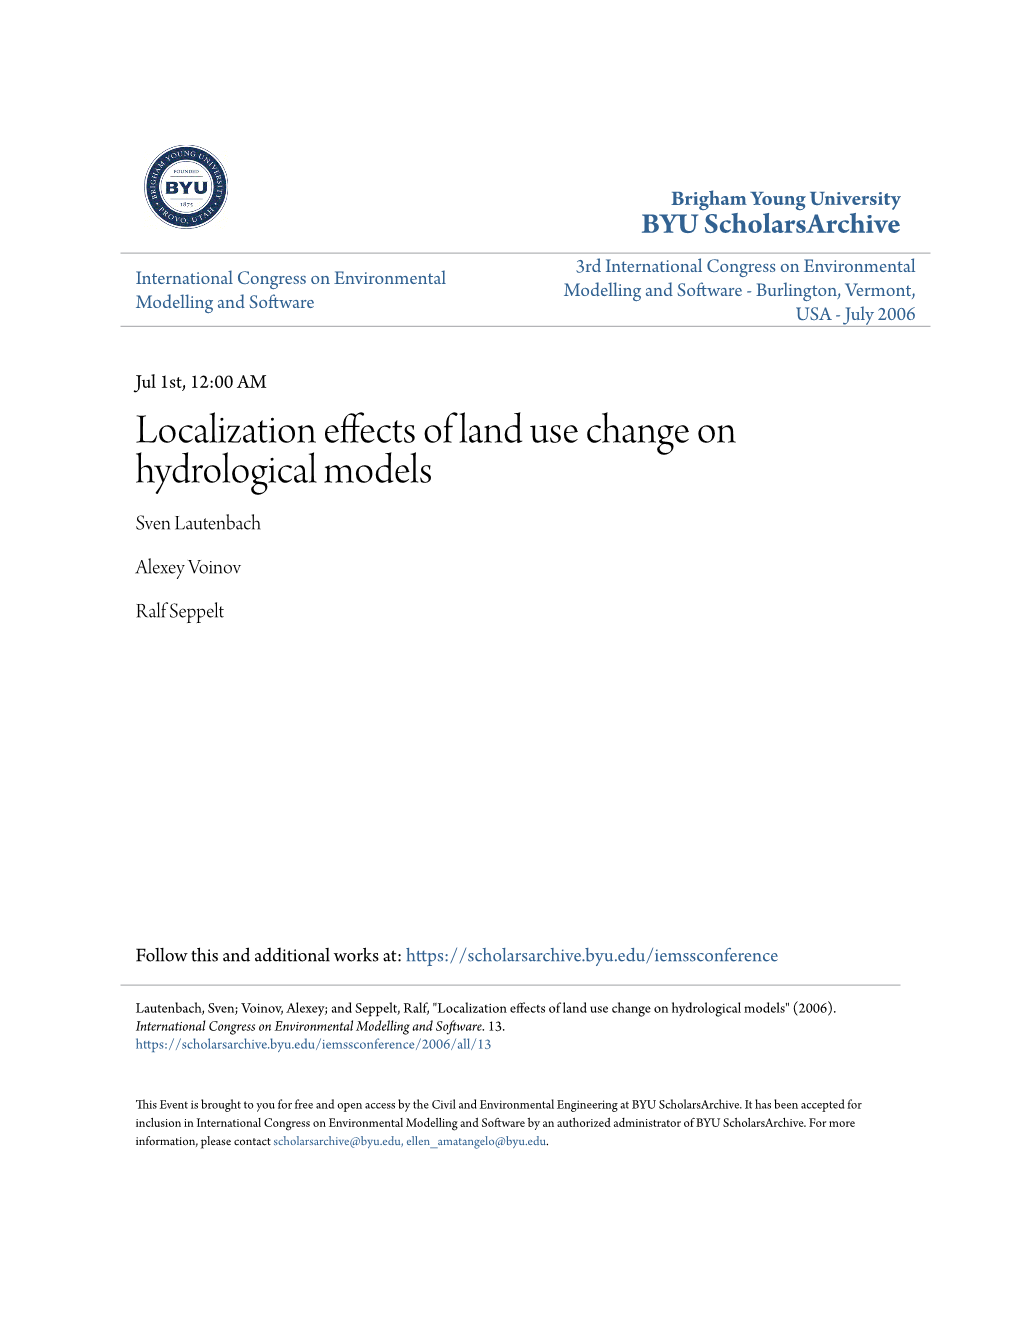 Localization Effects of Land Use Change on Hydrological Models Sven Lautenbach